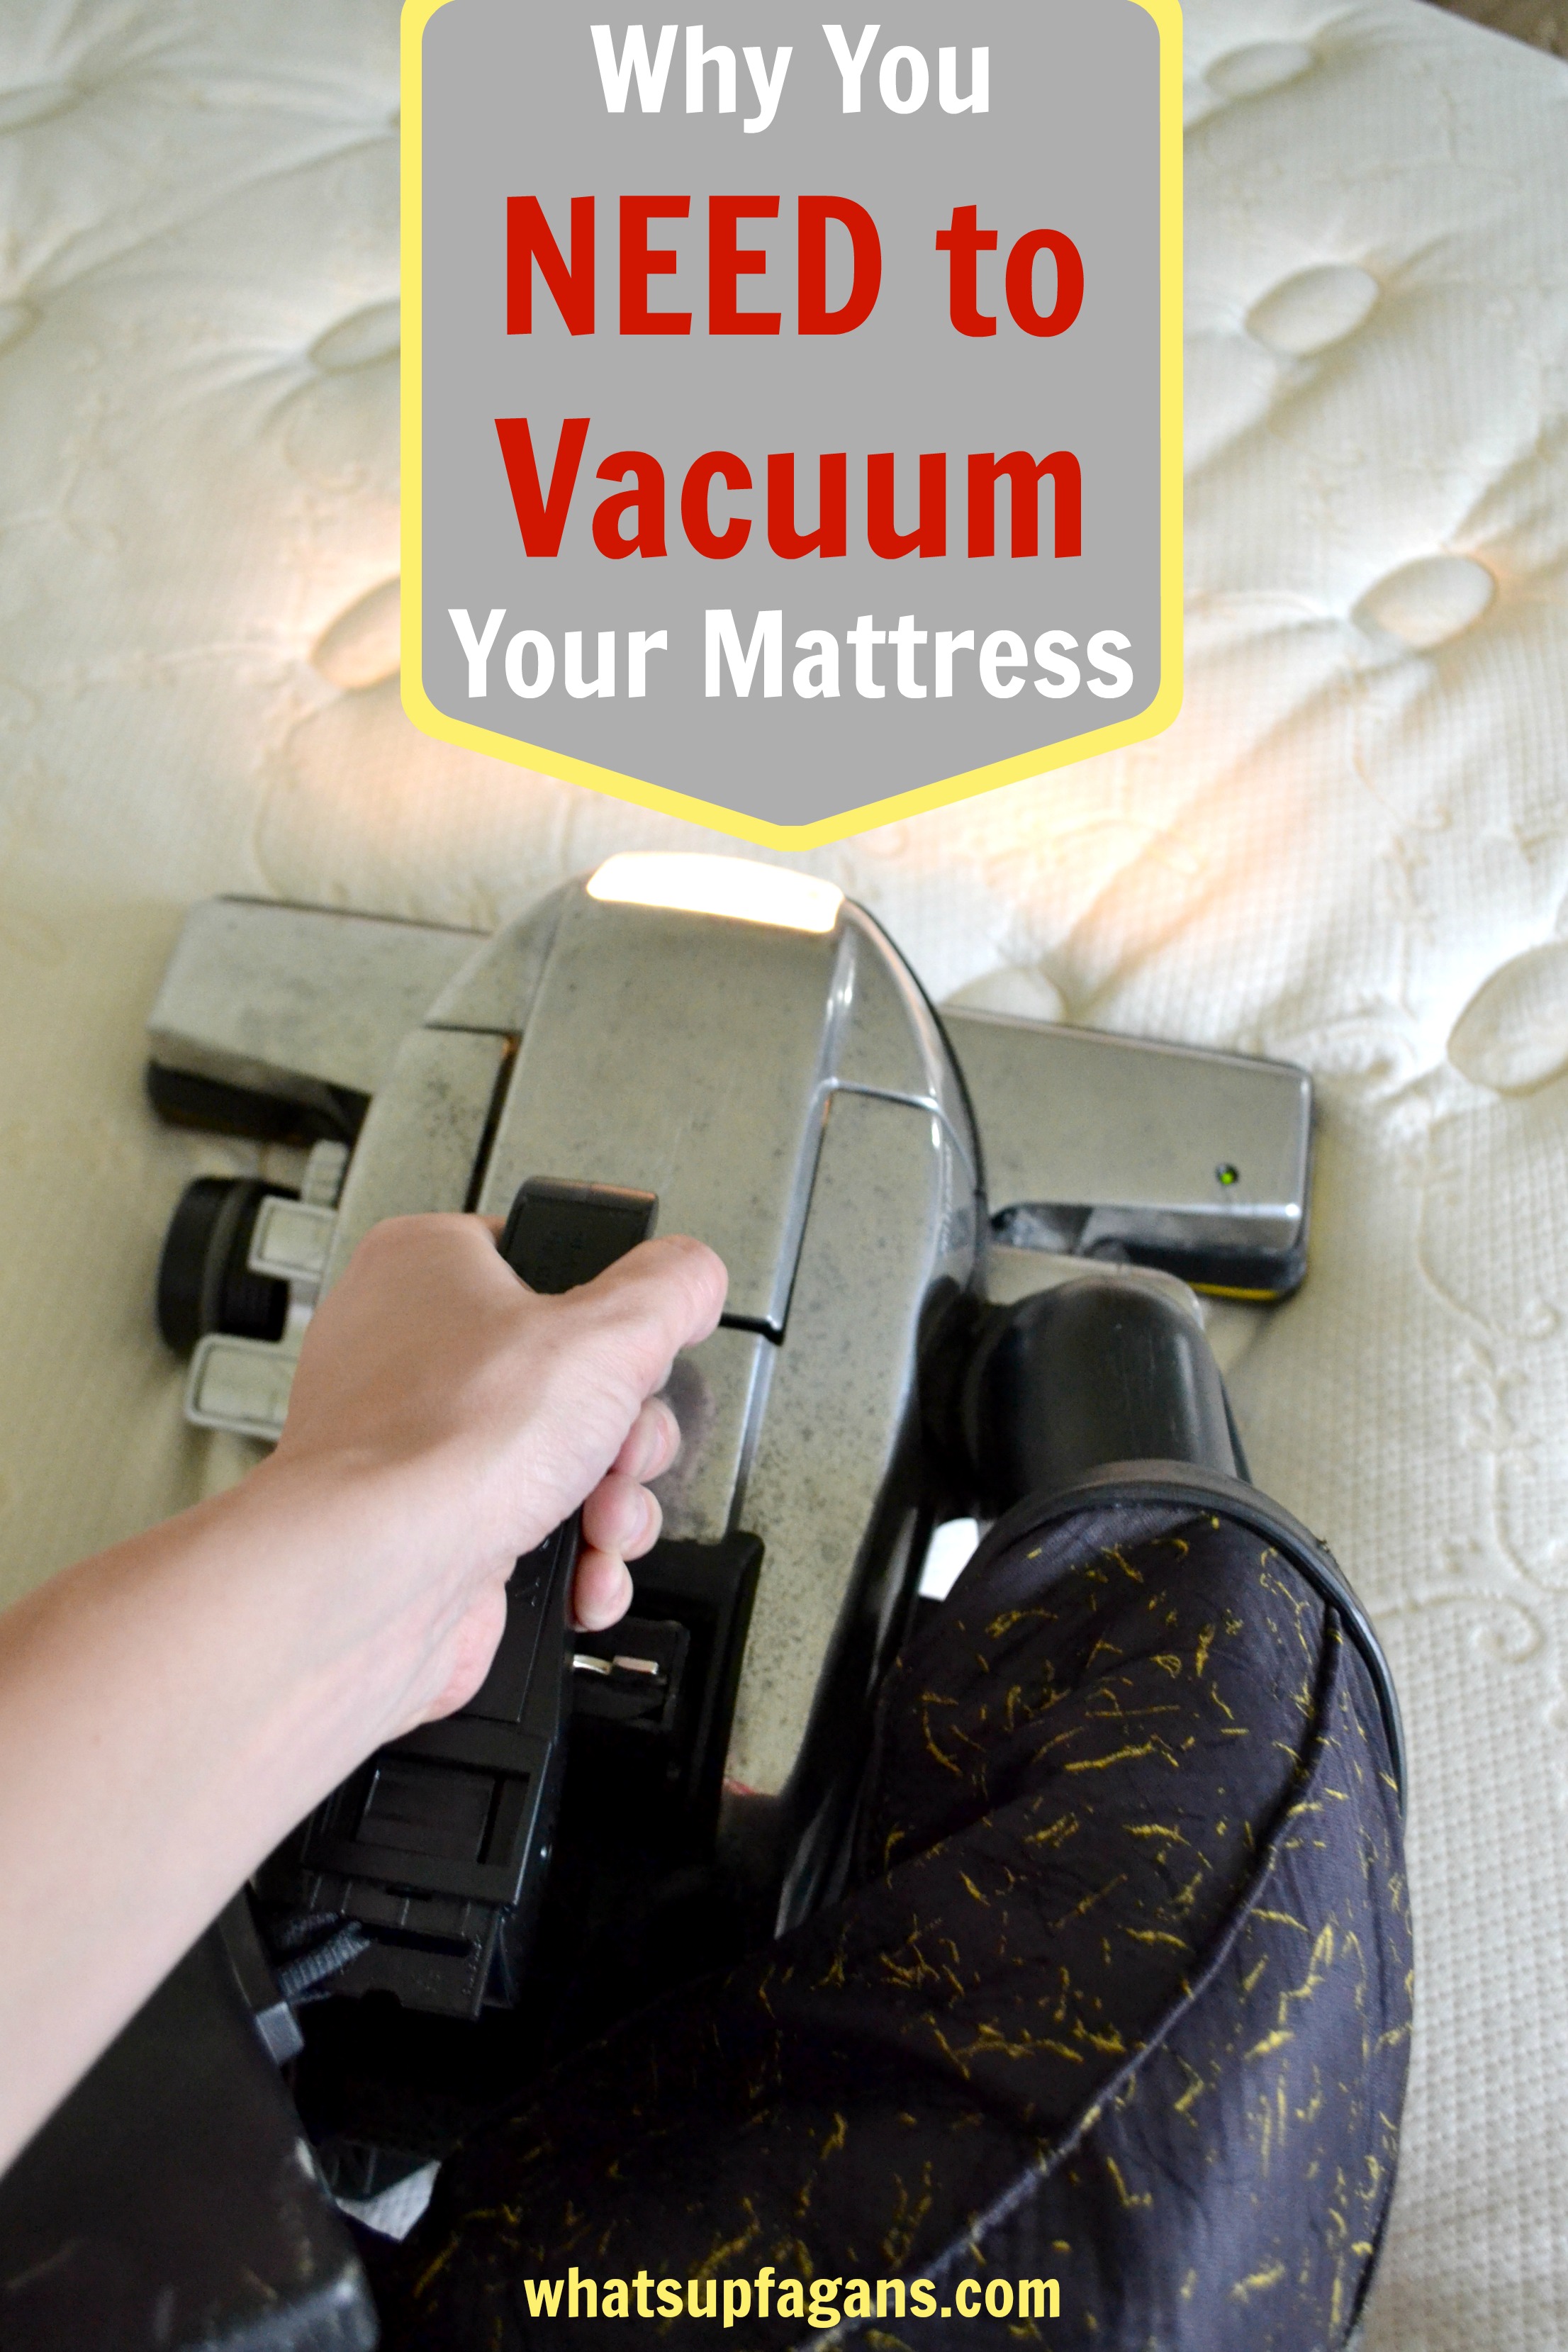 Did you know you should be vacuuming your mattress? Because I didn't! Totally going to now.